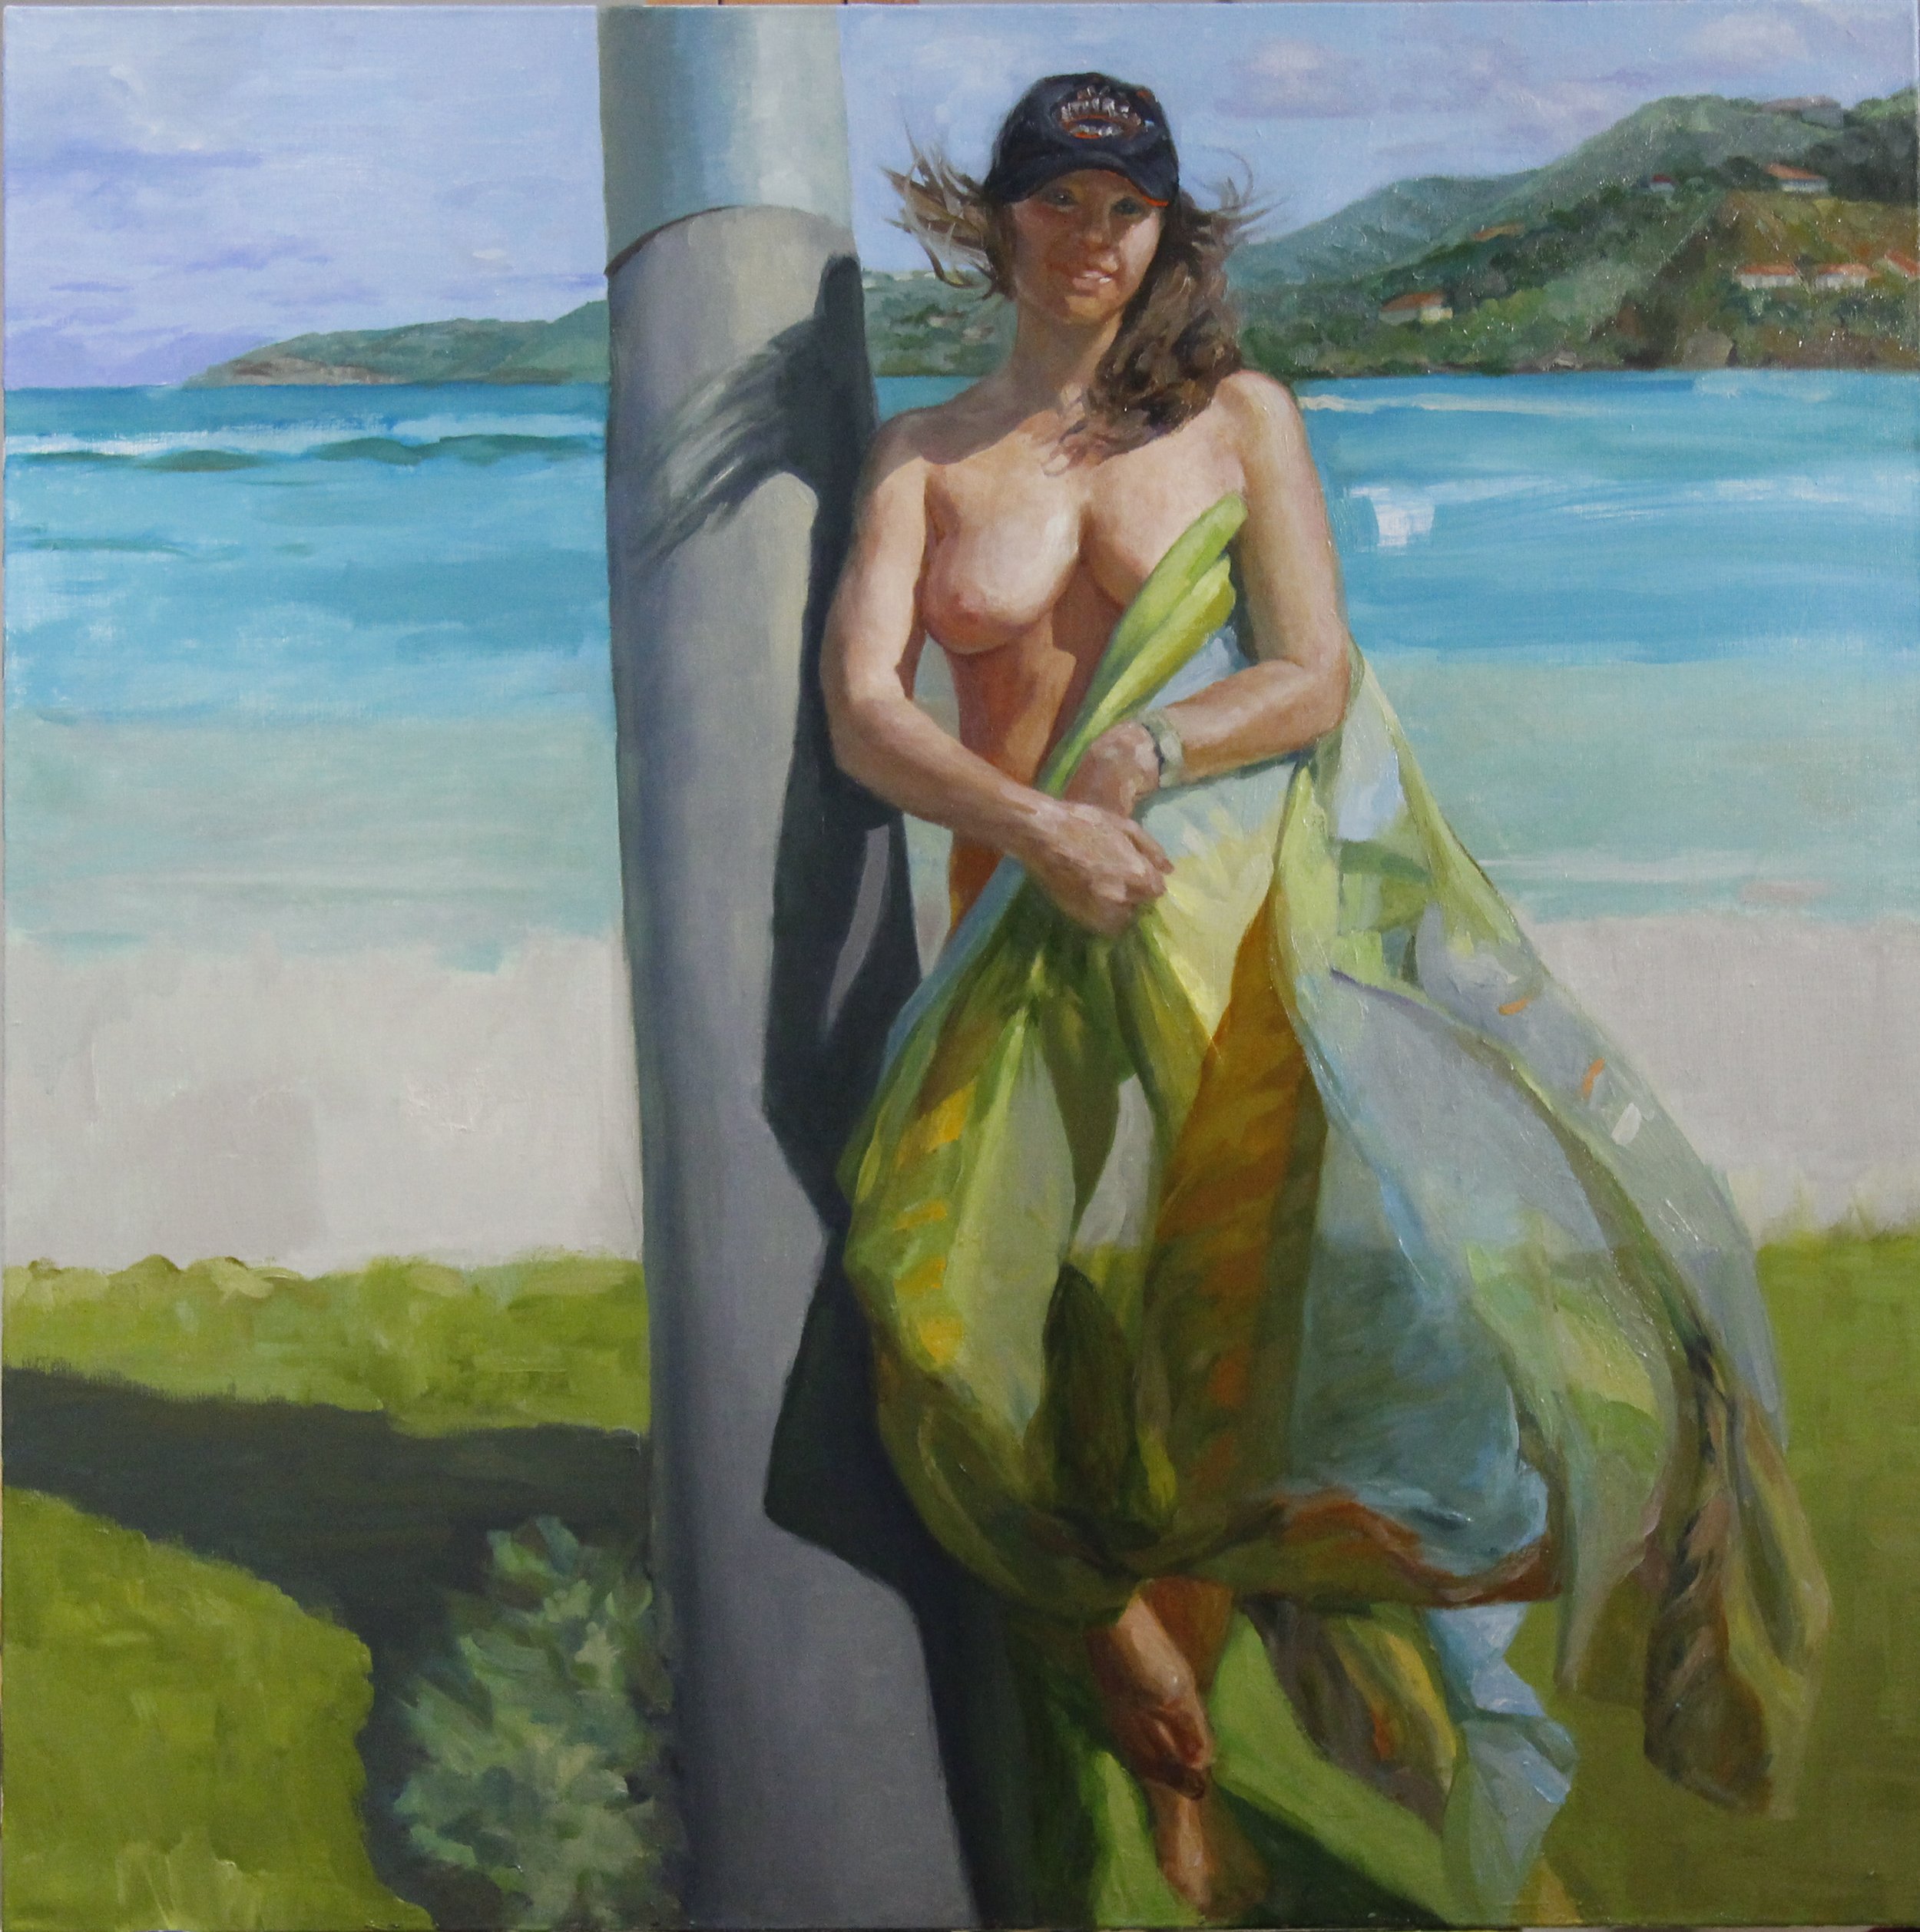 At St. Jean Beach, 2020, Oil on linen, 36x36 inches.